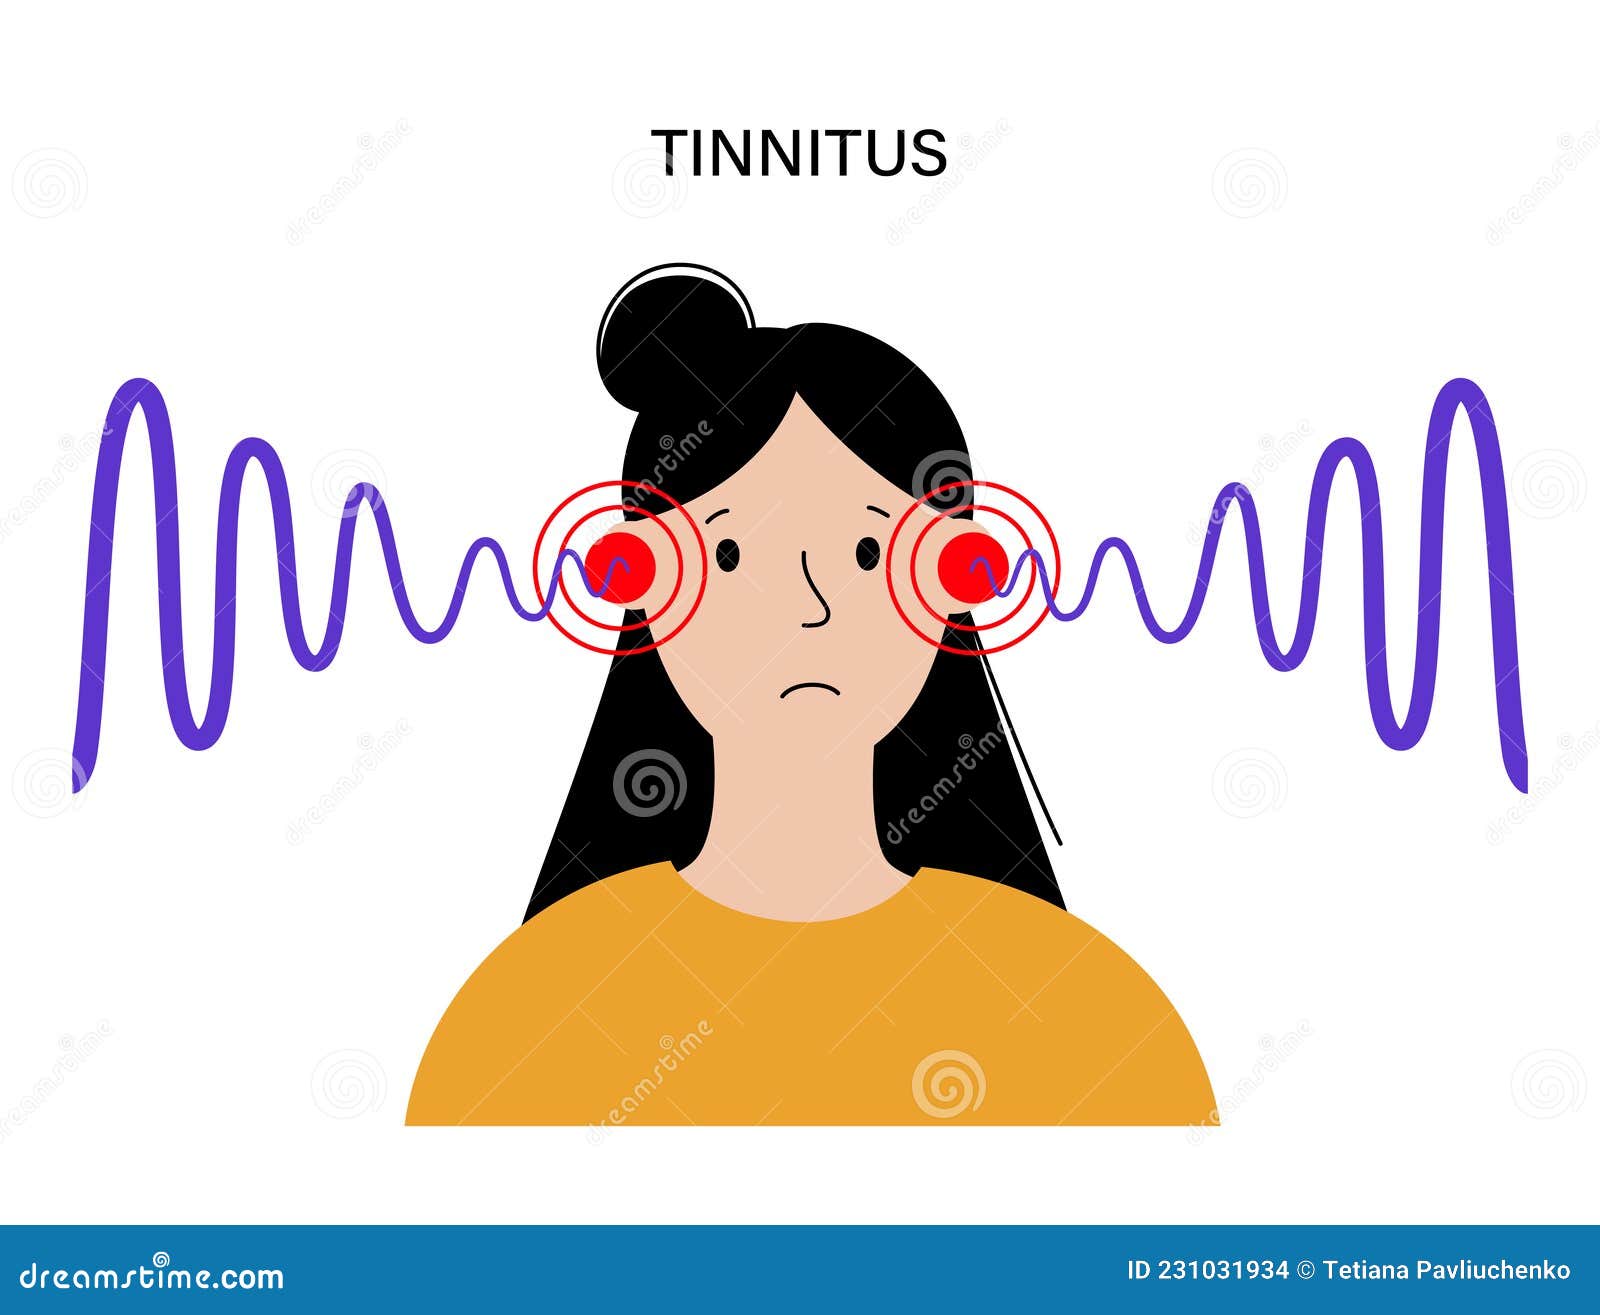 Tinnitus: What Is It, Causes, Treatment, and More | Osmosis